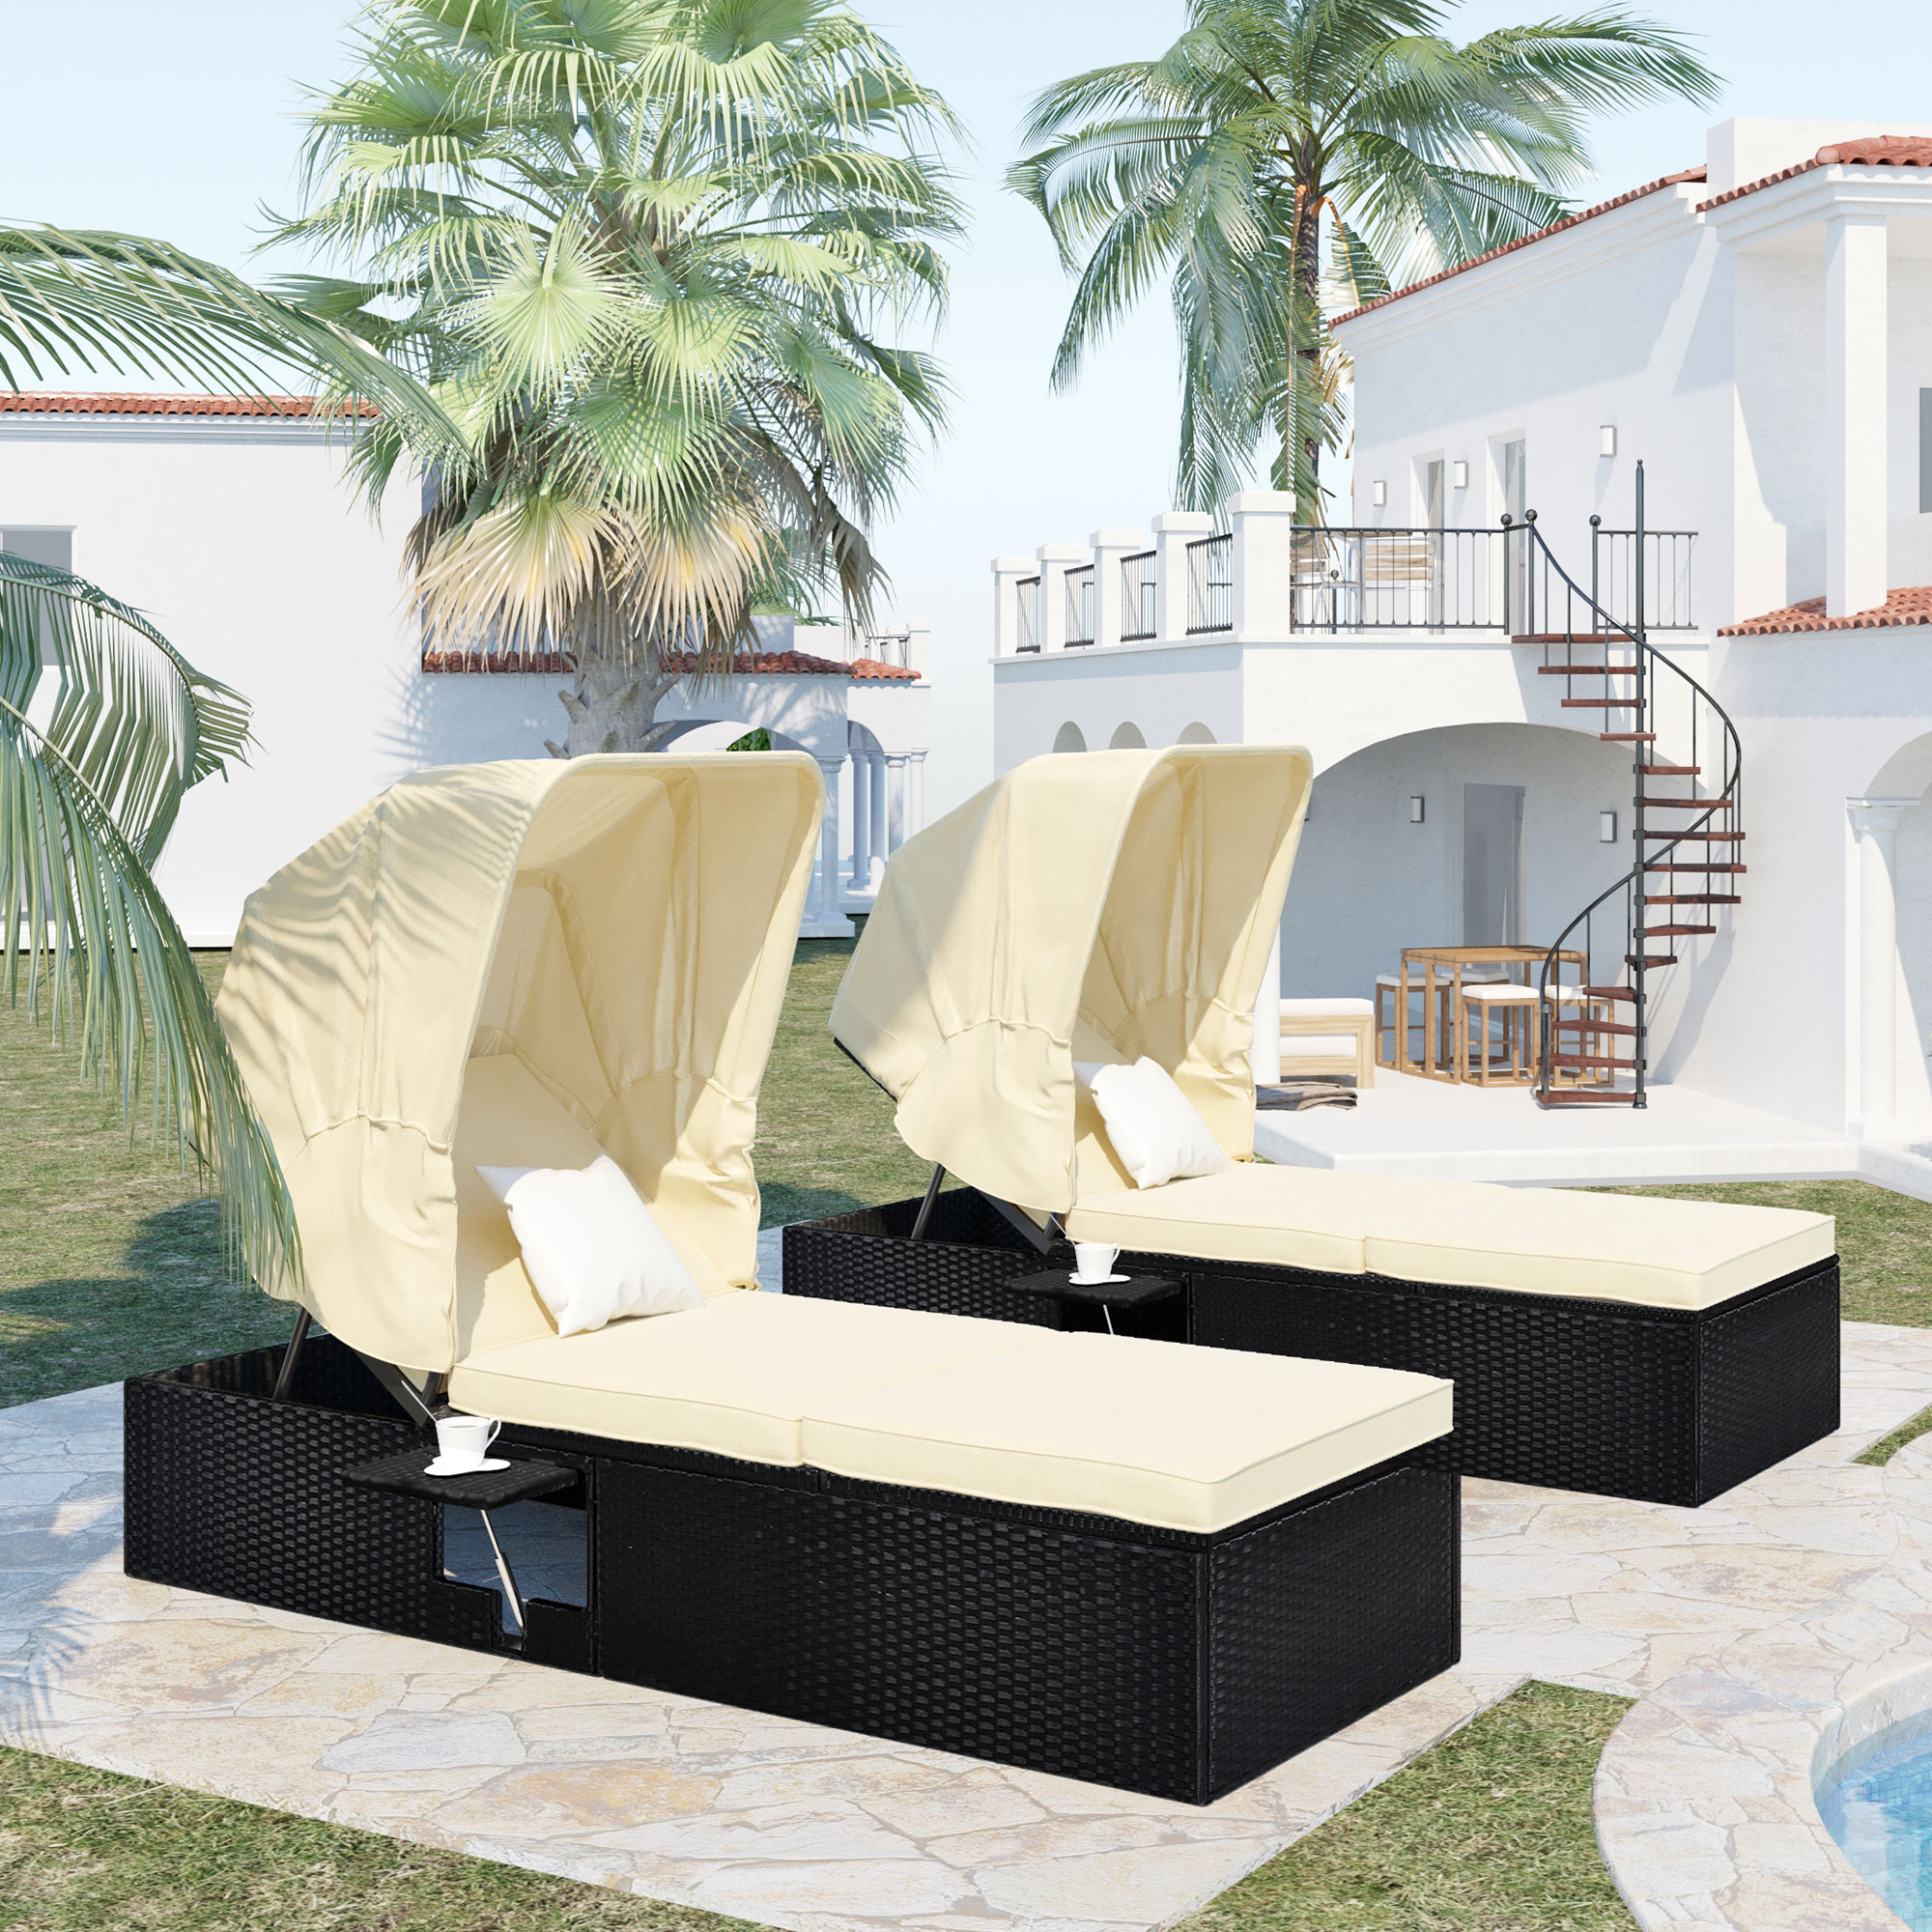 Outdoor PE Wicker Chaise Lounge, SYNGAR 2 Pieces Adjustable Reclining Chairs W/ Canopy and Cup Table, Patio Sun Lounger Set with Removable Cushion, Chaise Set for Poolside Garden Porch, Beige, D7331 - image 2 of 12